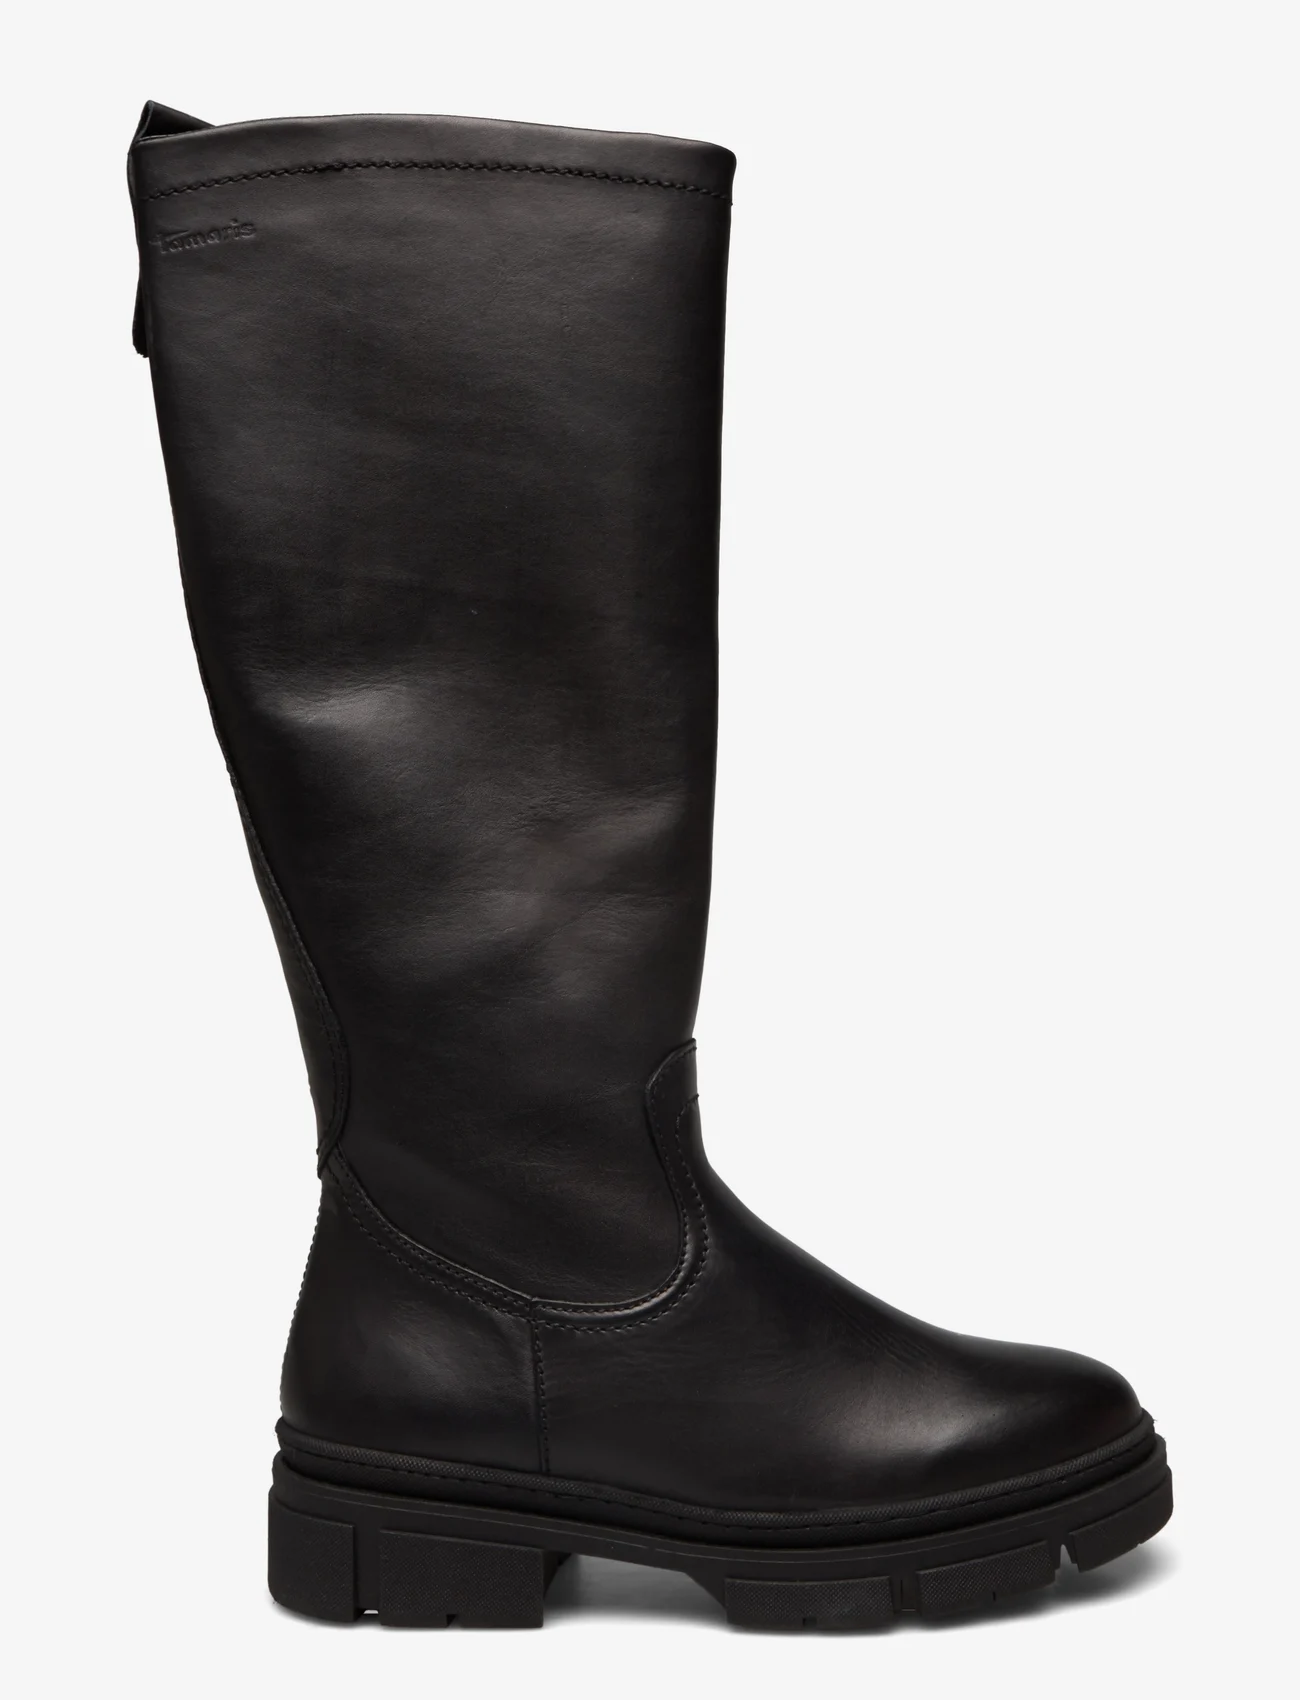 Tamaris - Woms Boots - black leather - 1